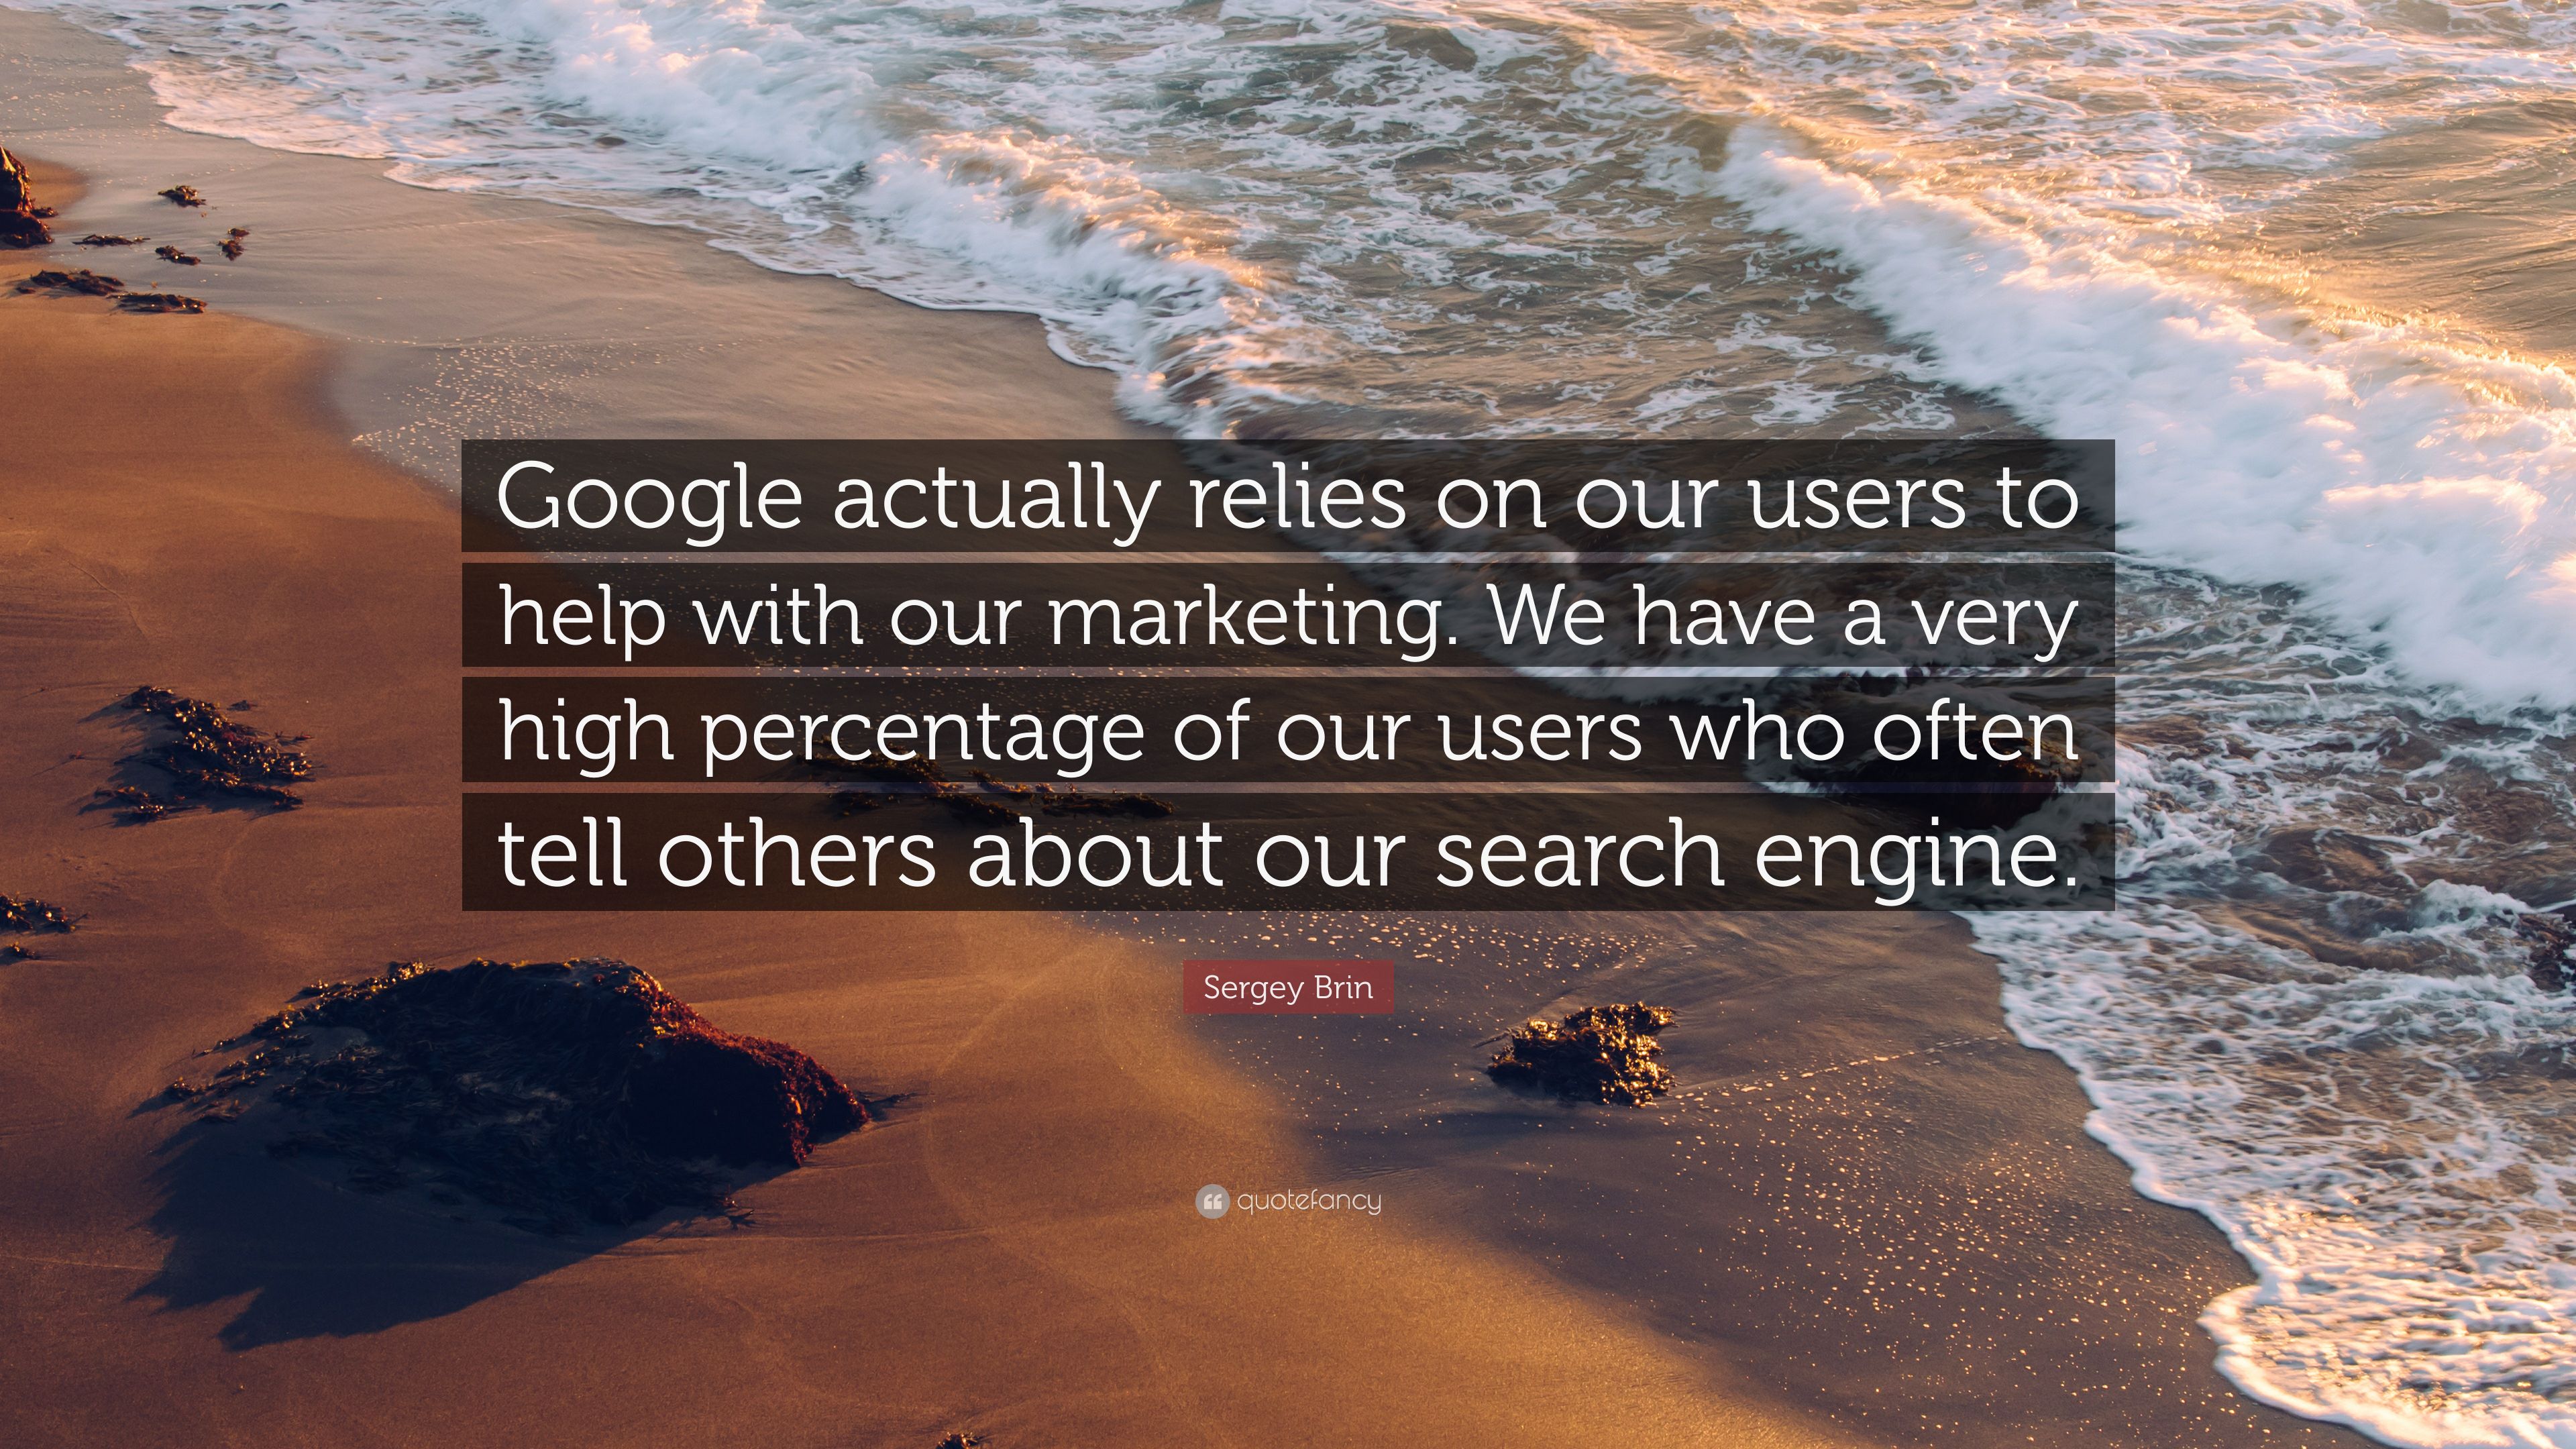 Sergey Brin Quote: “Google actually relies on our users to help